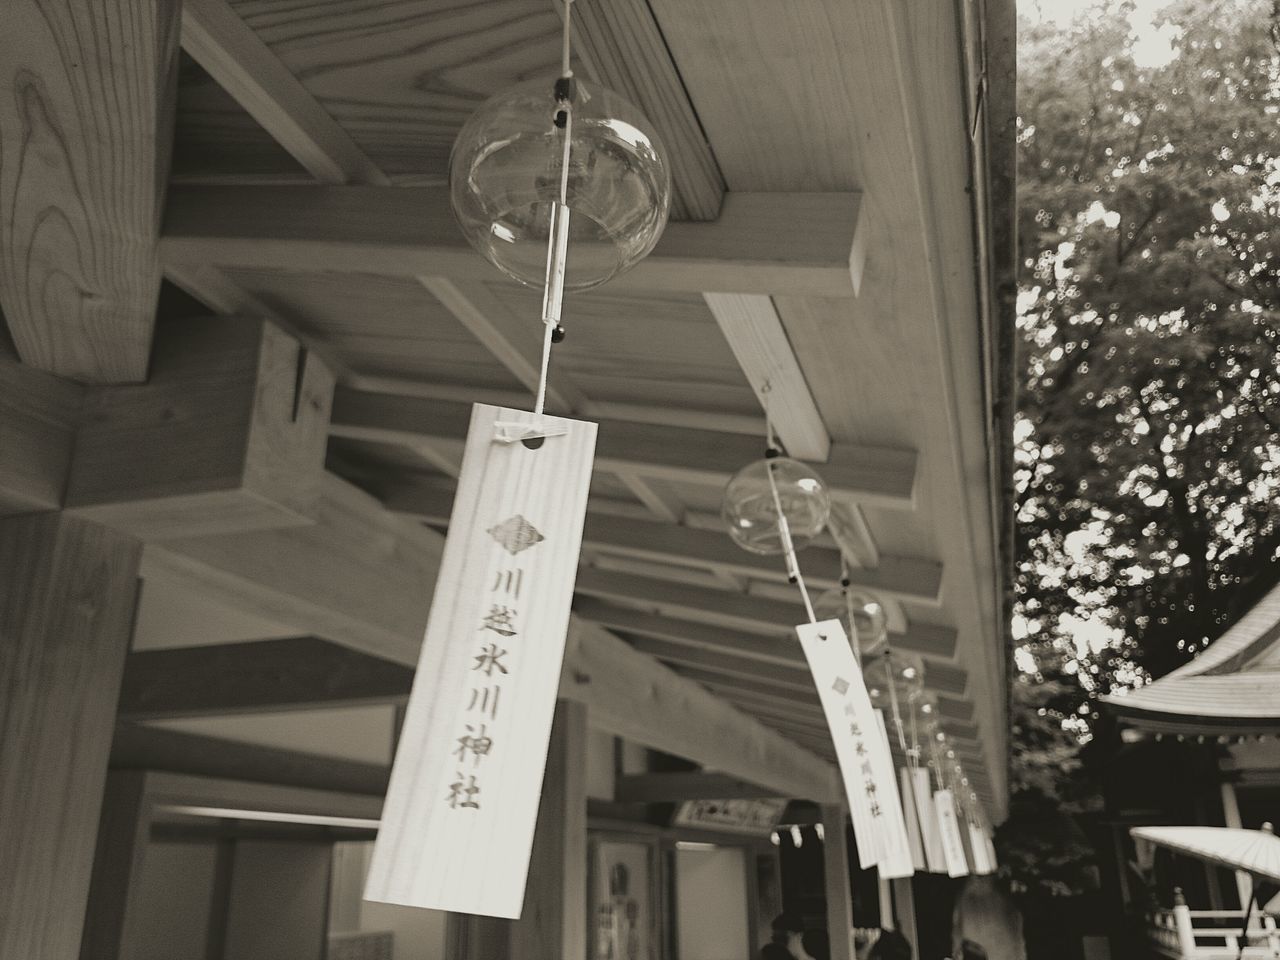 hanging, text, low angle view, communication, western script, built structure, architecture, building exterior, lighting equipment, non-western script, decoration, lantern, day, indoors, no people, wood - material, store, information sign, building